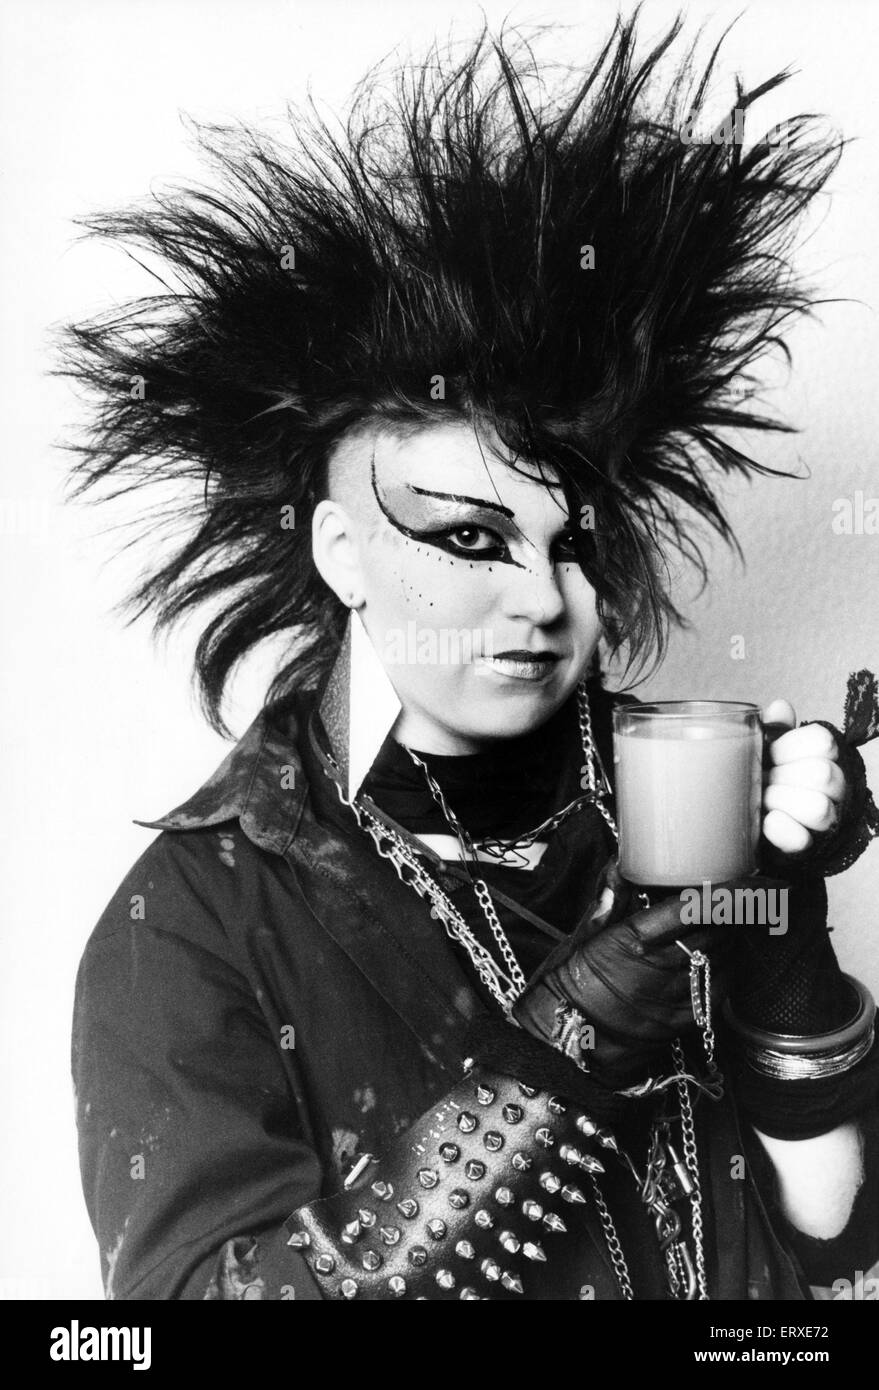 Punk teenagers in Birmingham are protesting about a 'discriminatory' increase in the price of a cup of tea in the restaurant at Rackhams. They claim they are discriminated against because of their spiky Mohican hair styles and unusual clothes. Pictured is Stock Photo